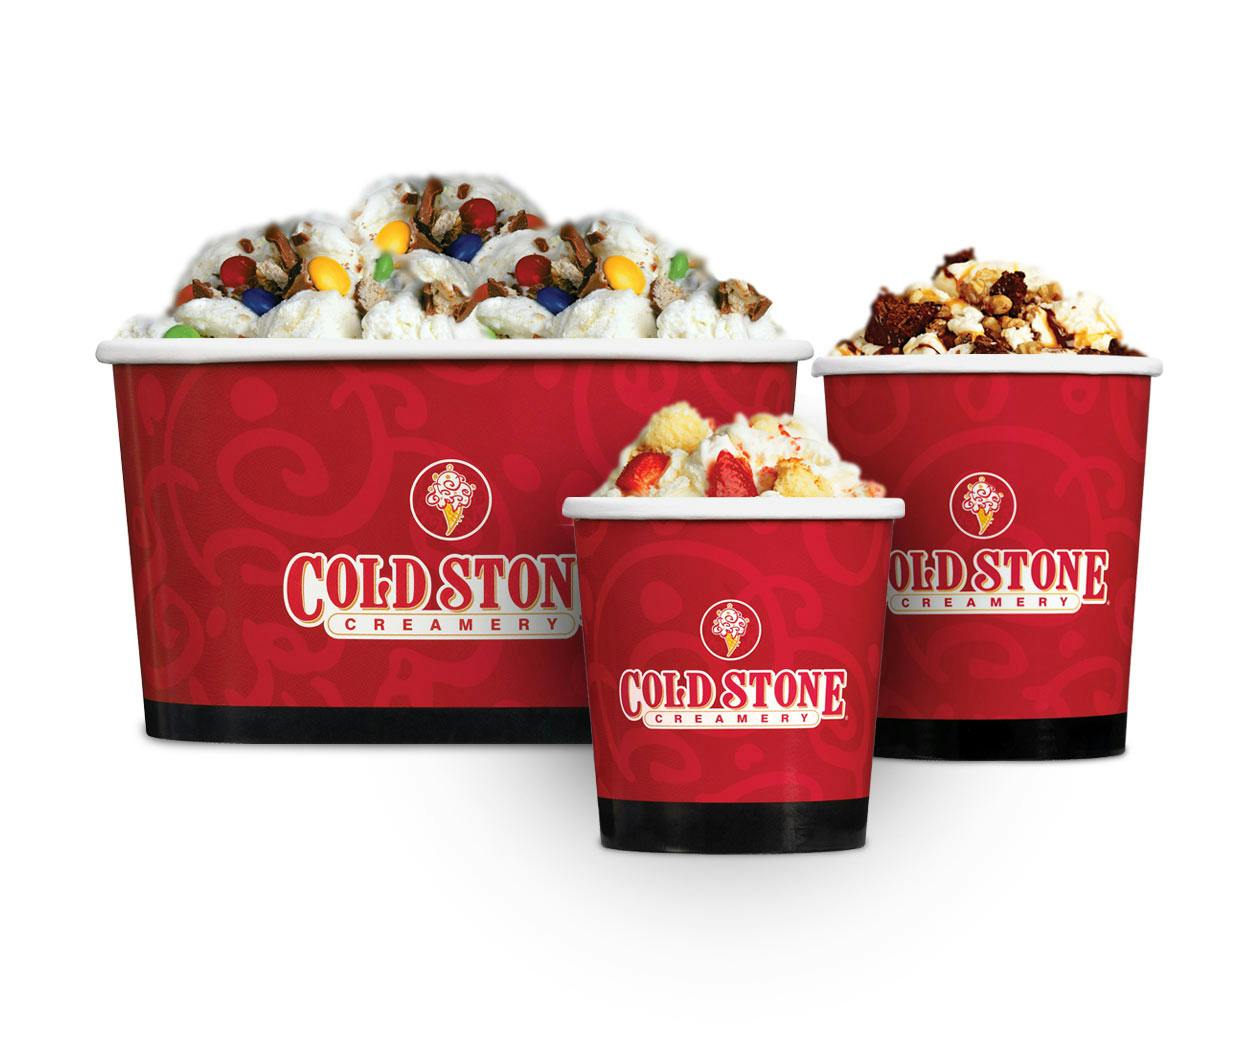 Tub: Ours from Cold Stone Creamery - Green Bay in Green Bay, WI